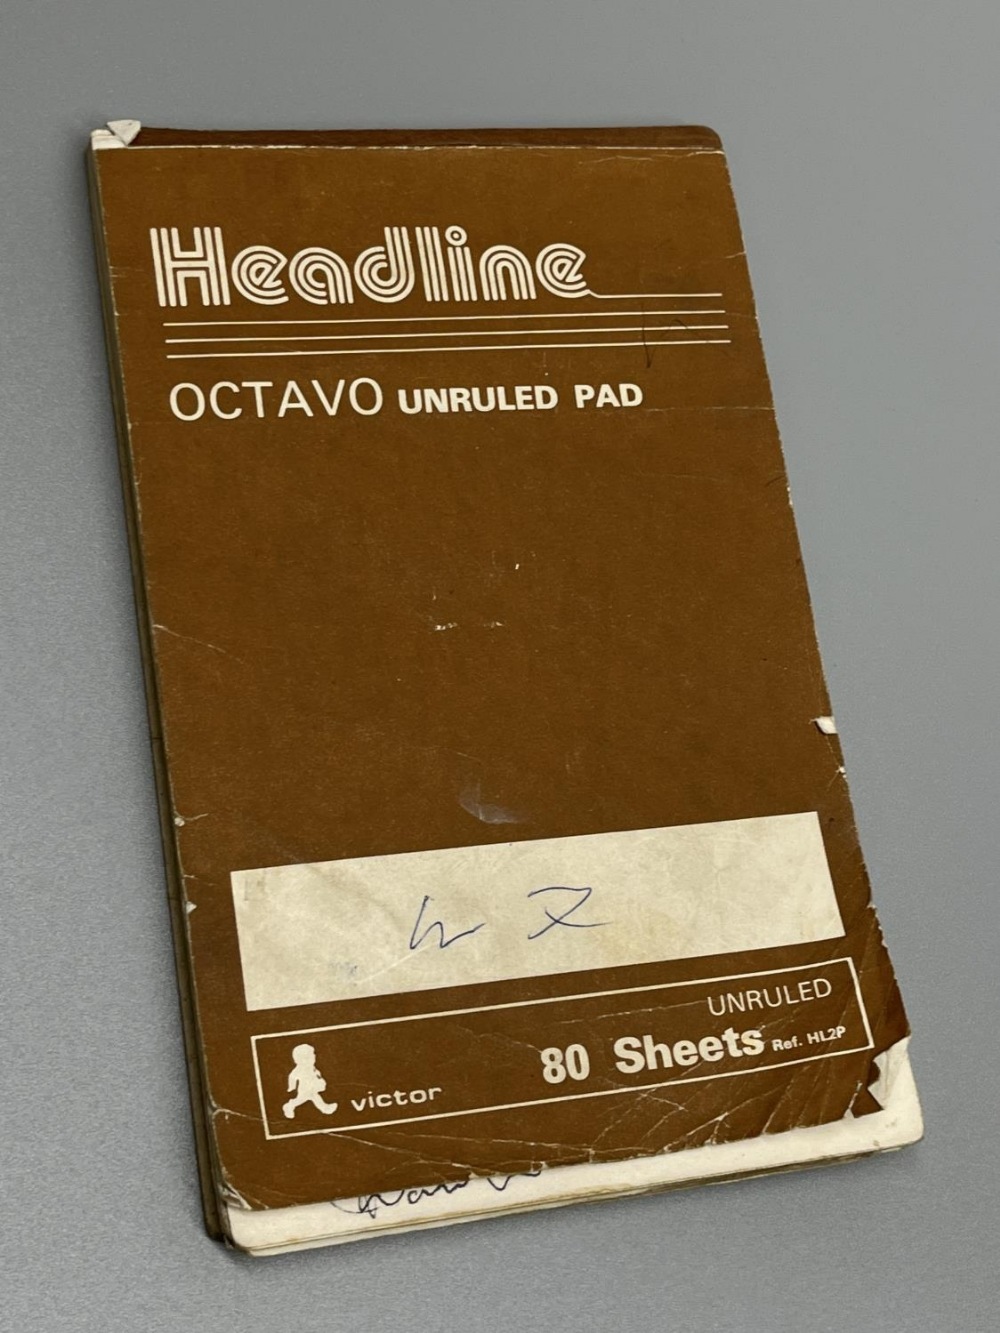 Unruled pad containing various Football related signatures inc. 4 FIFA referees, team players from - Image 4 of 4